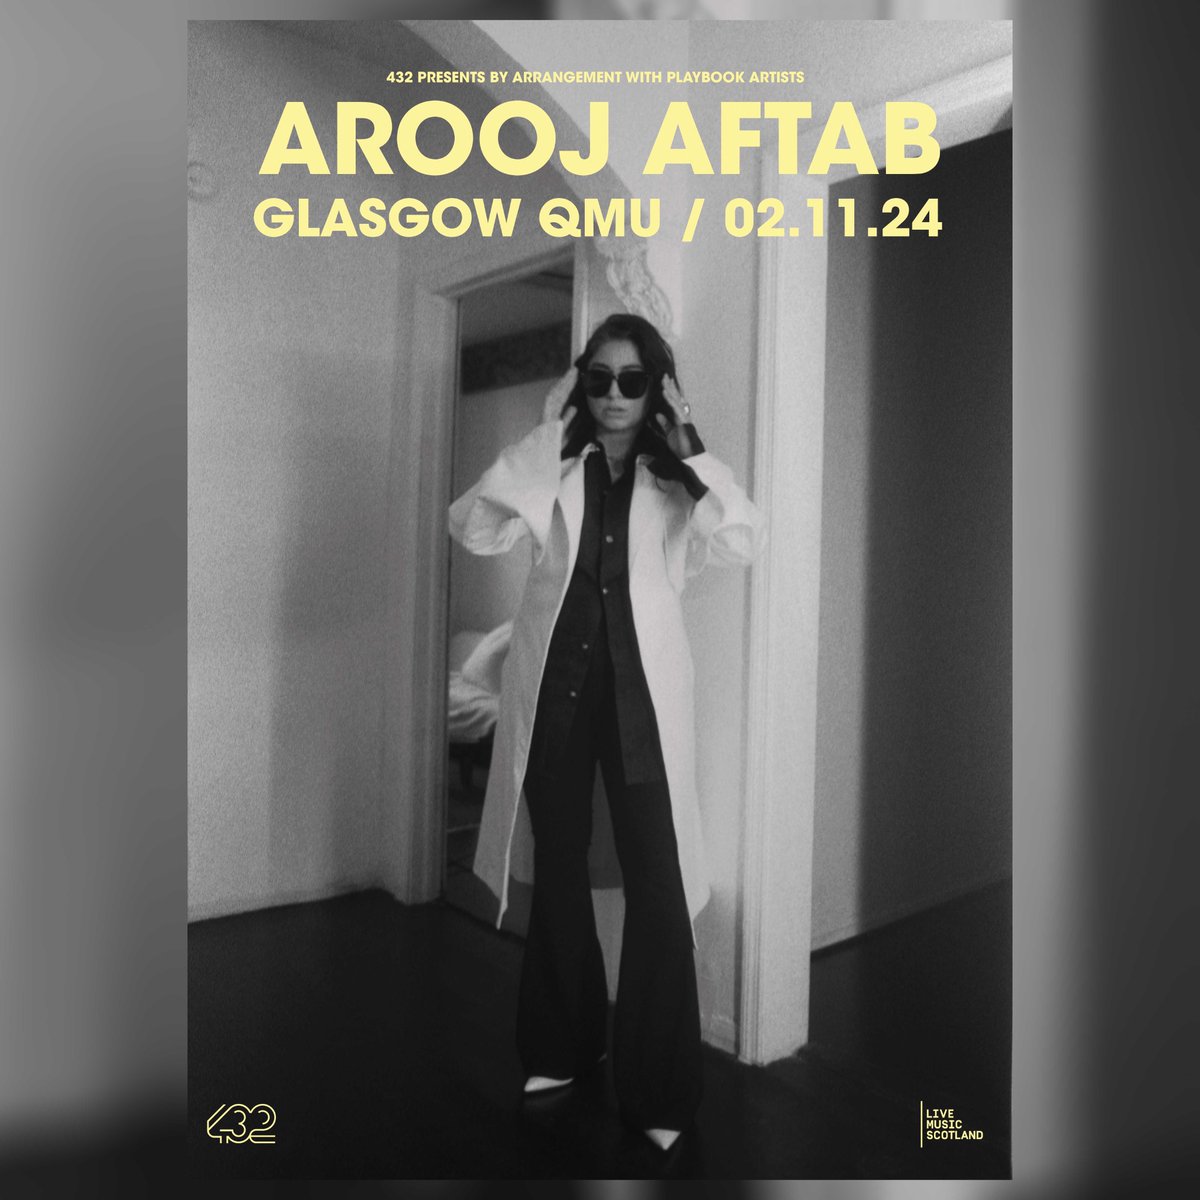 JUST ANNOUNCED! Grammy Award-winning artist #AroojAftab brings new album Night Reign to @GlasgowQMU for a very special performance on Sat 2 Nov ✨ Tickets on sale Wed 24 April @ 10am 🎟 ➡ bit.ly/3Q0s9Xv